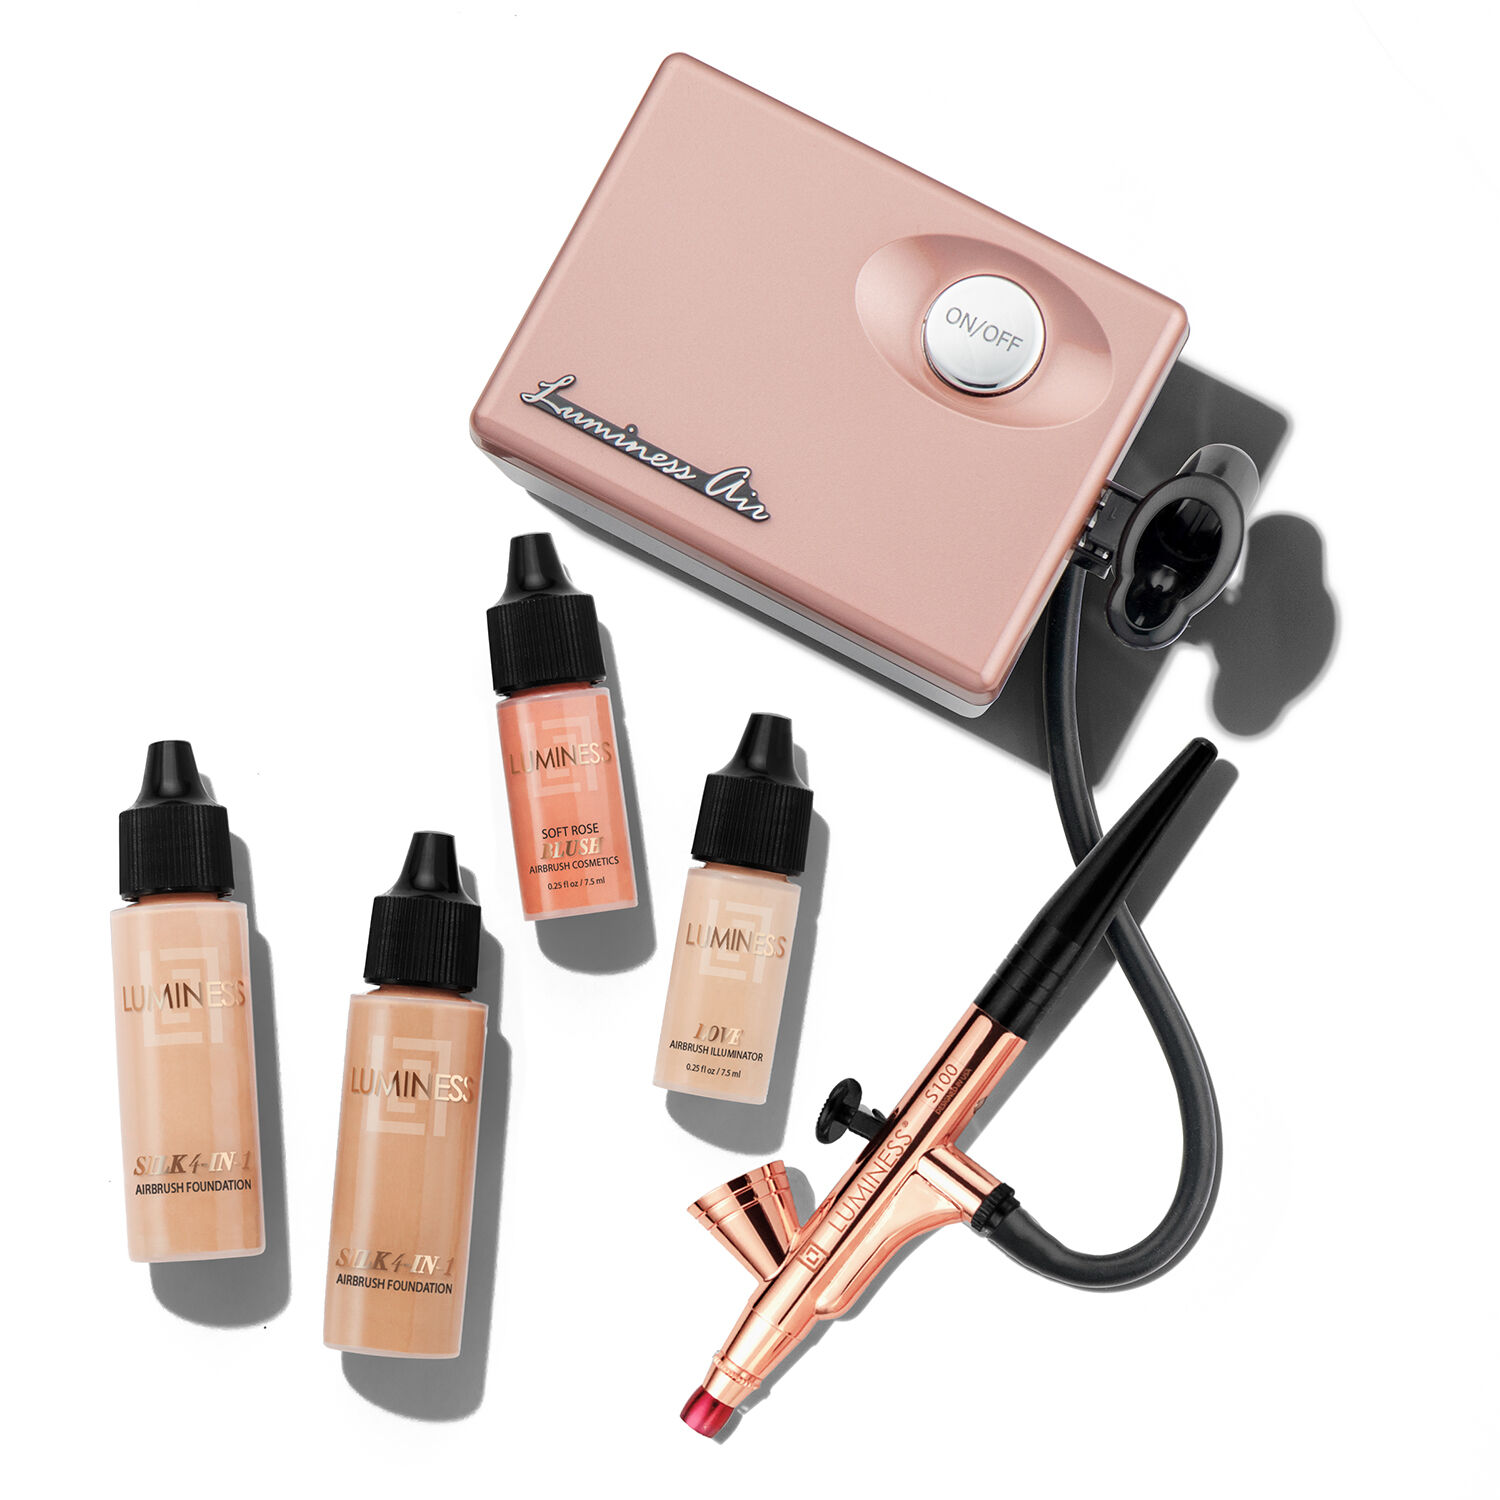  LUMINESS Icon Airbrush Makeup System - Makeup Airbrush Kit with  Compressor - Precise, Touchless, & Portable Airbrush Kit & Makeup Sprayer - Air  Brush Kit with Air Compressor - Quiet Airbrush